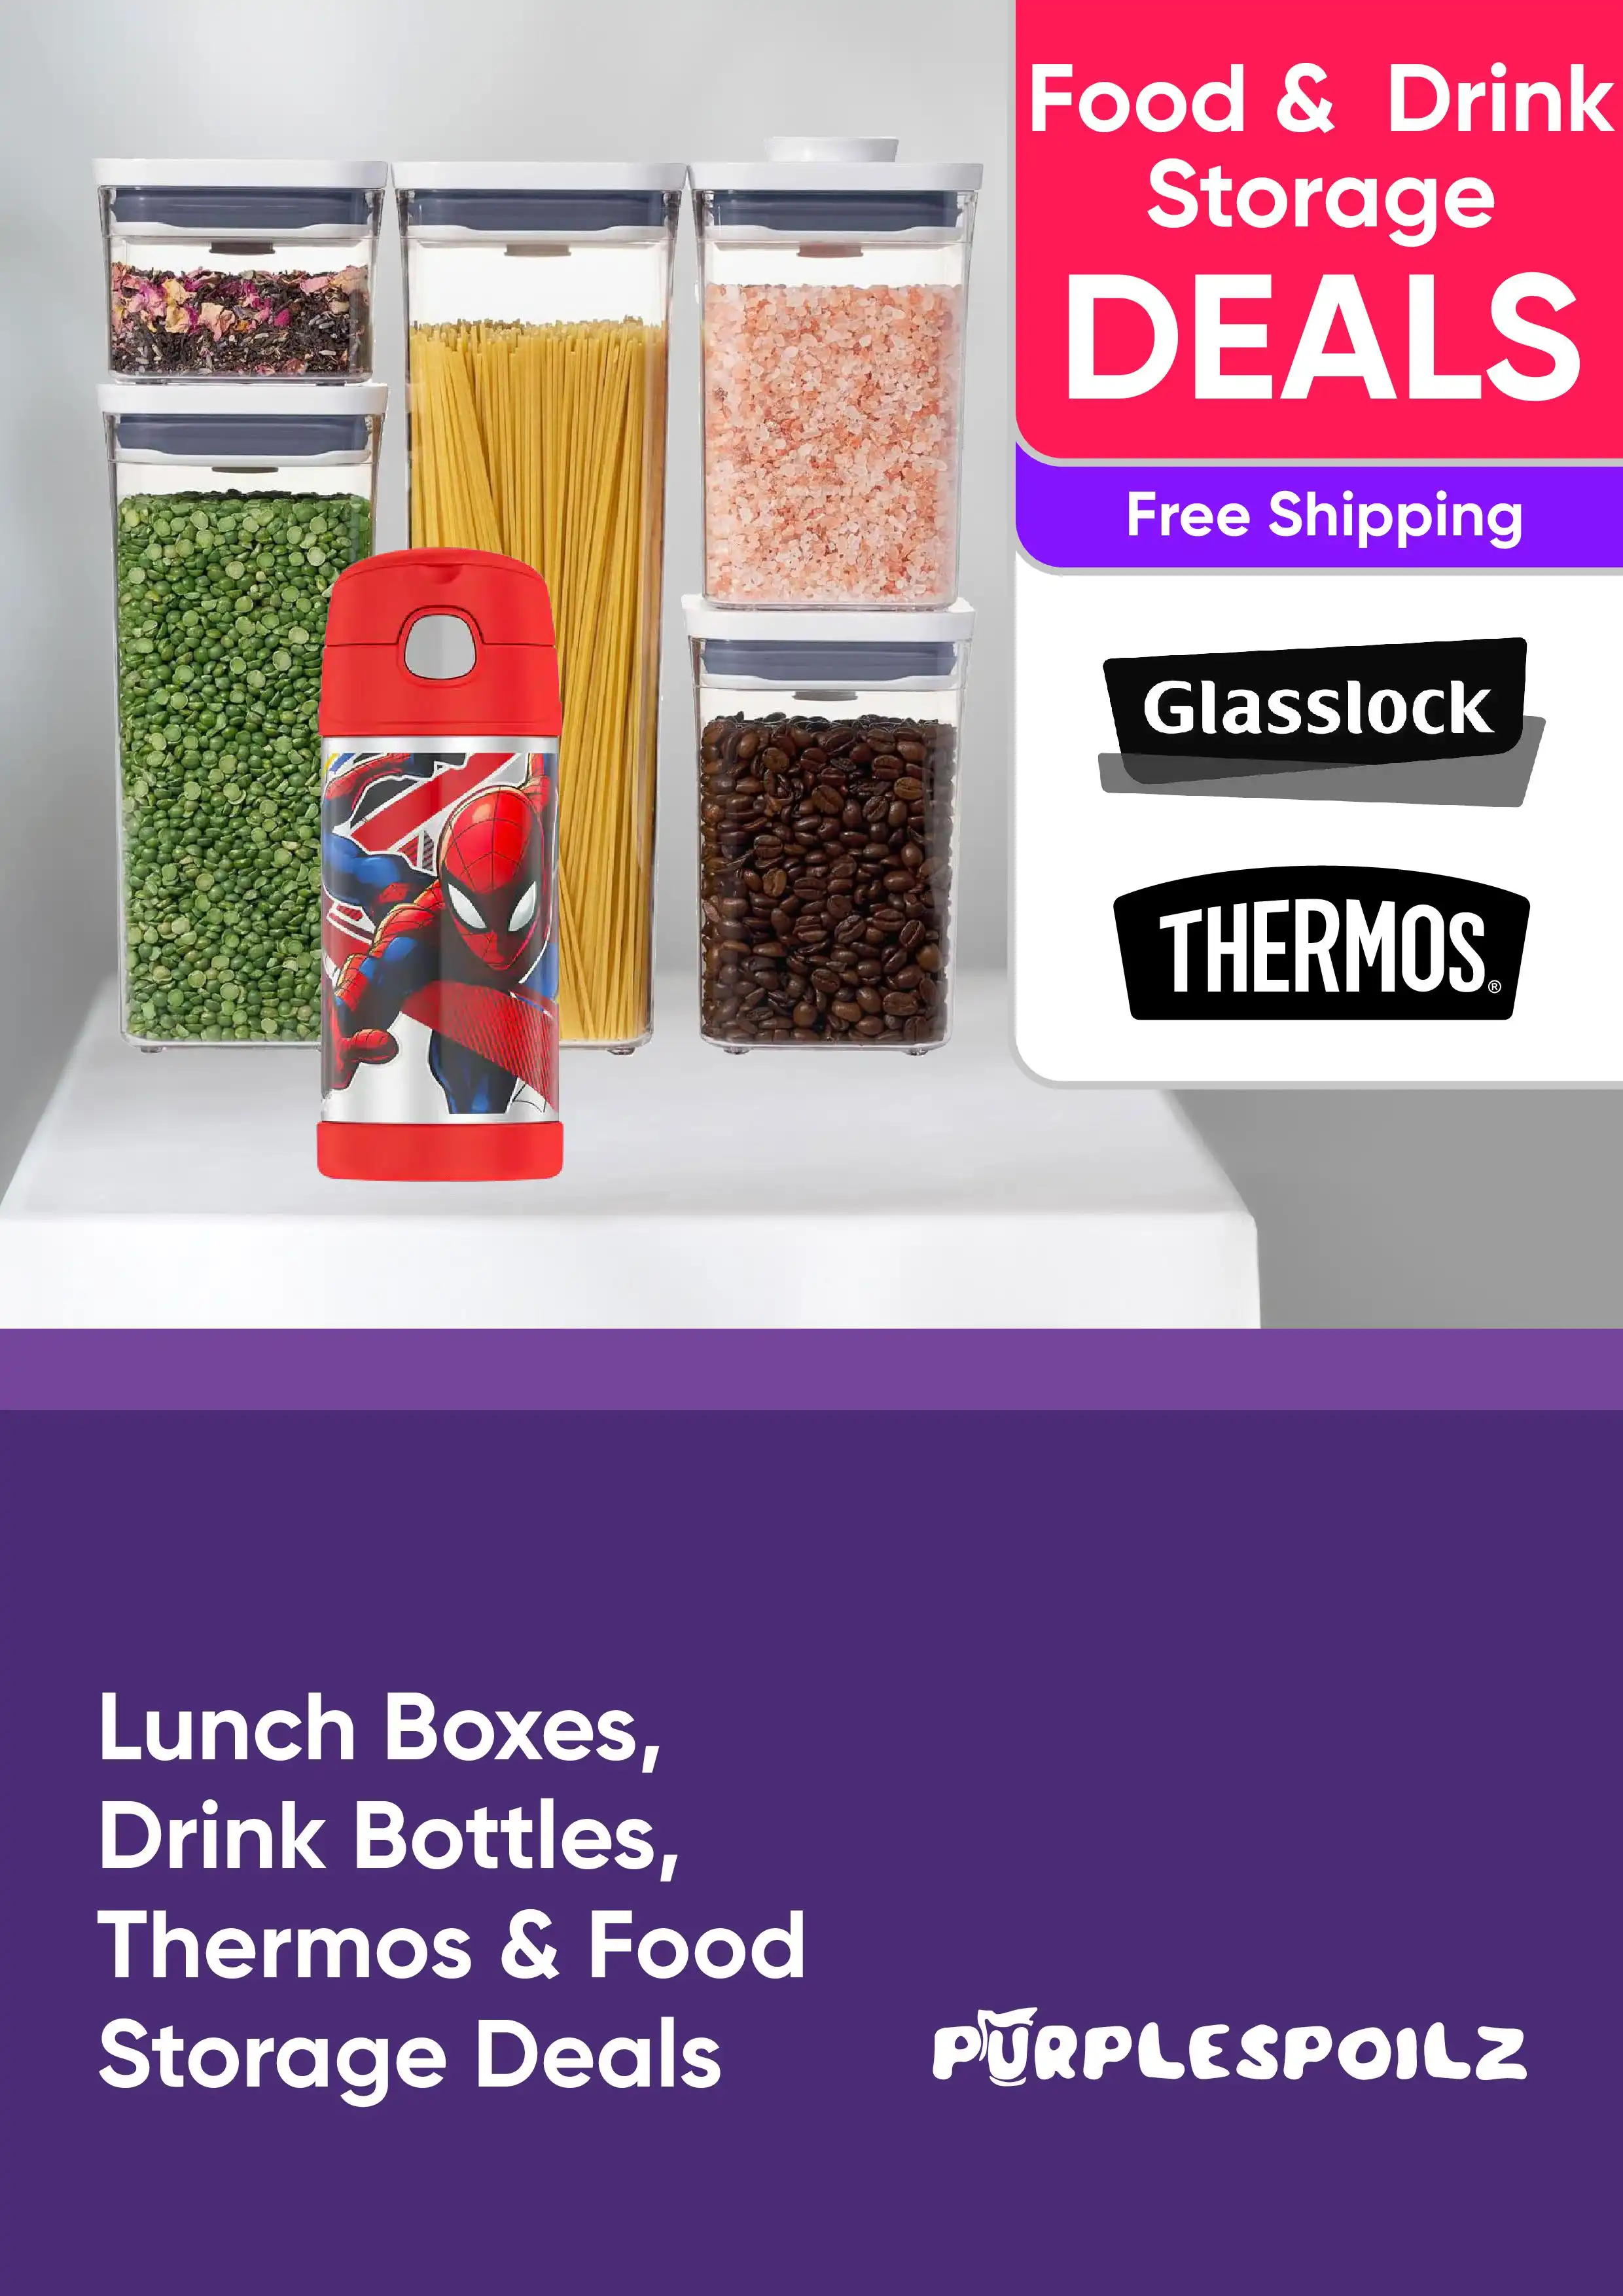 Lunch Boxes, Drink Bottles, Thermos and Food Storage Deals - Free Shipping